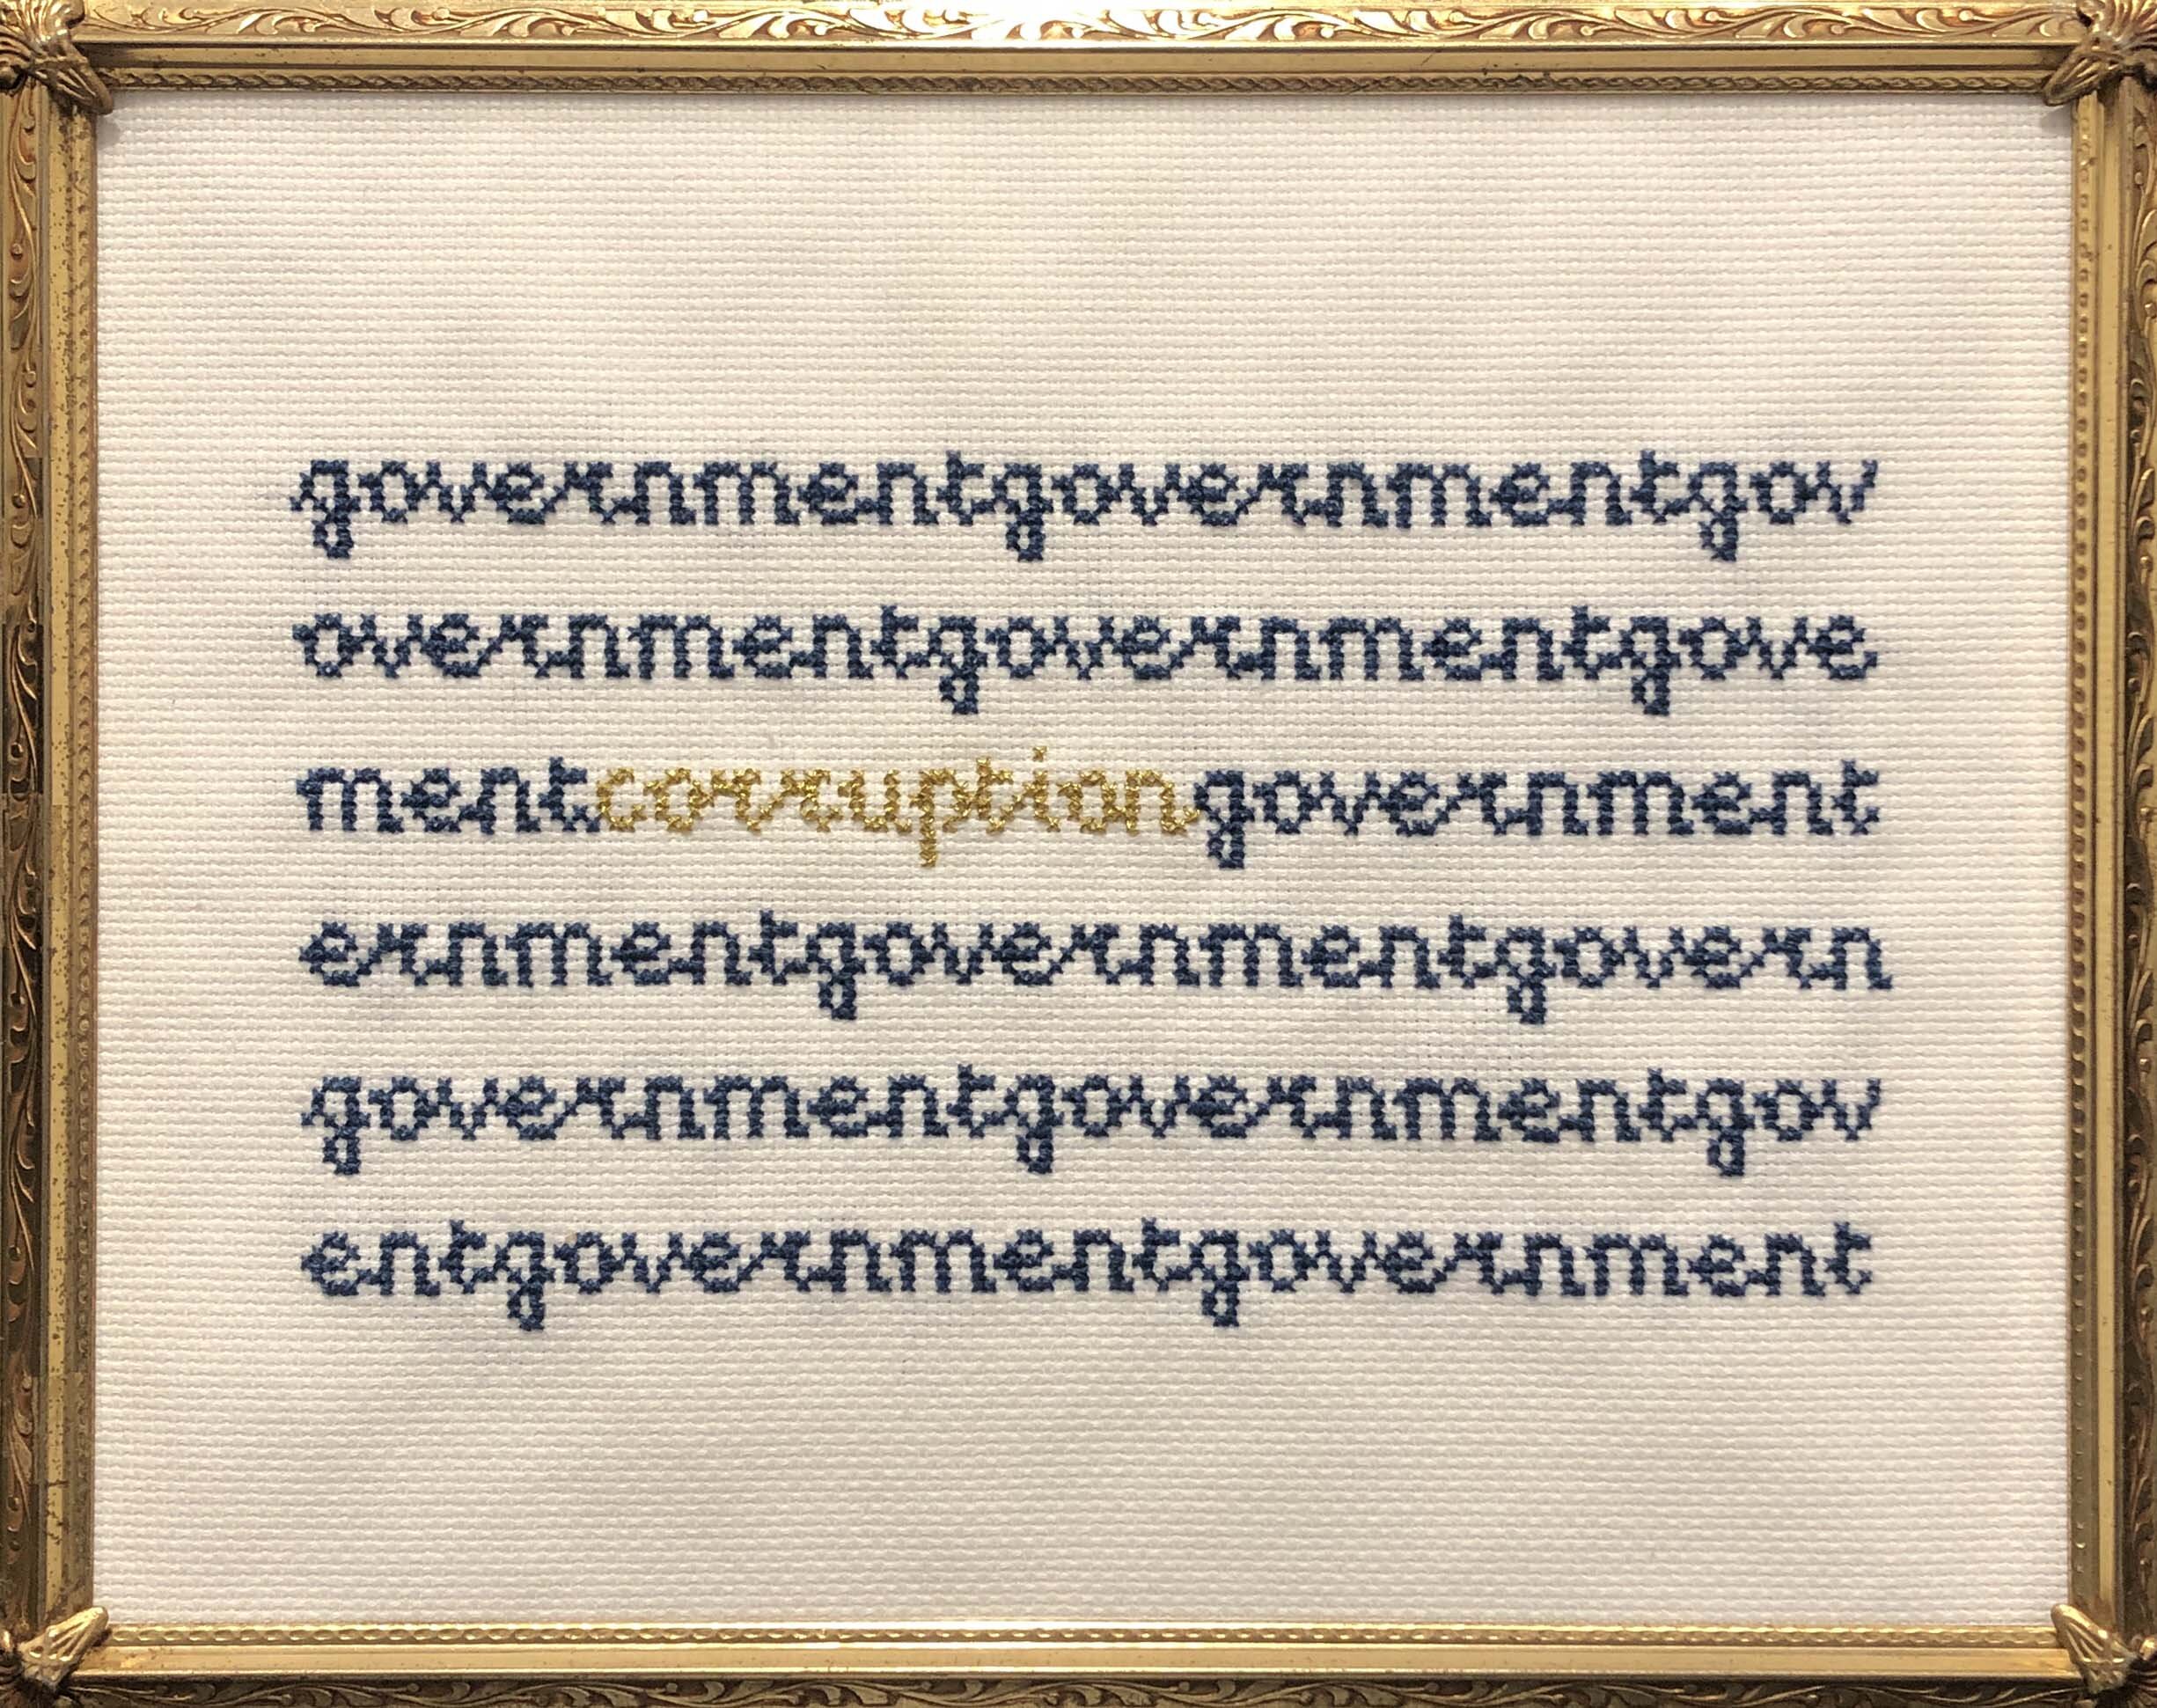   Inside Government Corruption,  embroidery floss on Aida cloth, vintage frame, 9" x 12", 2014 